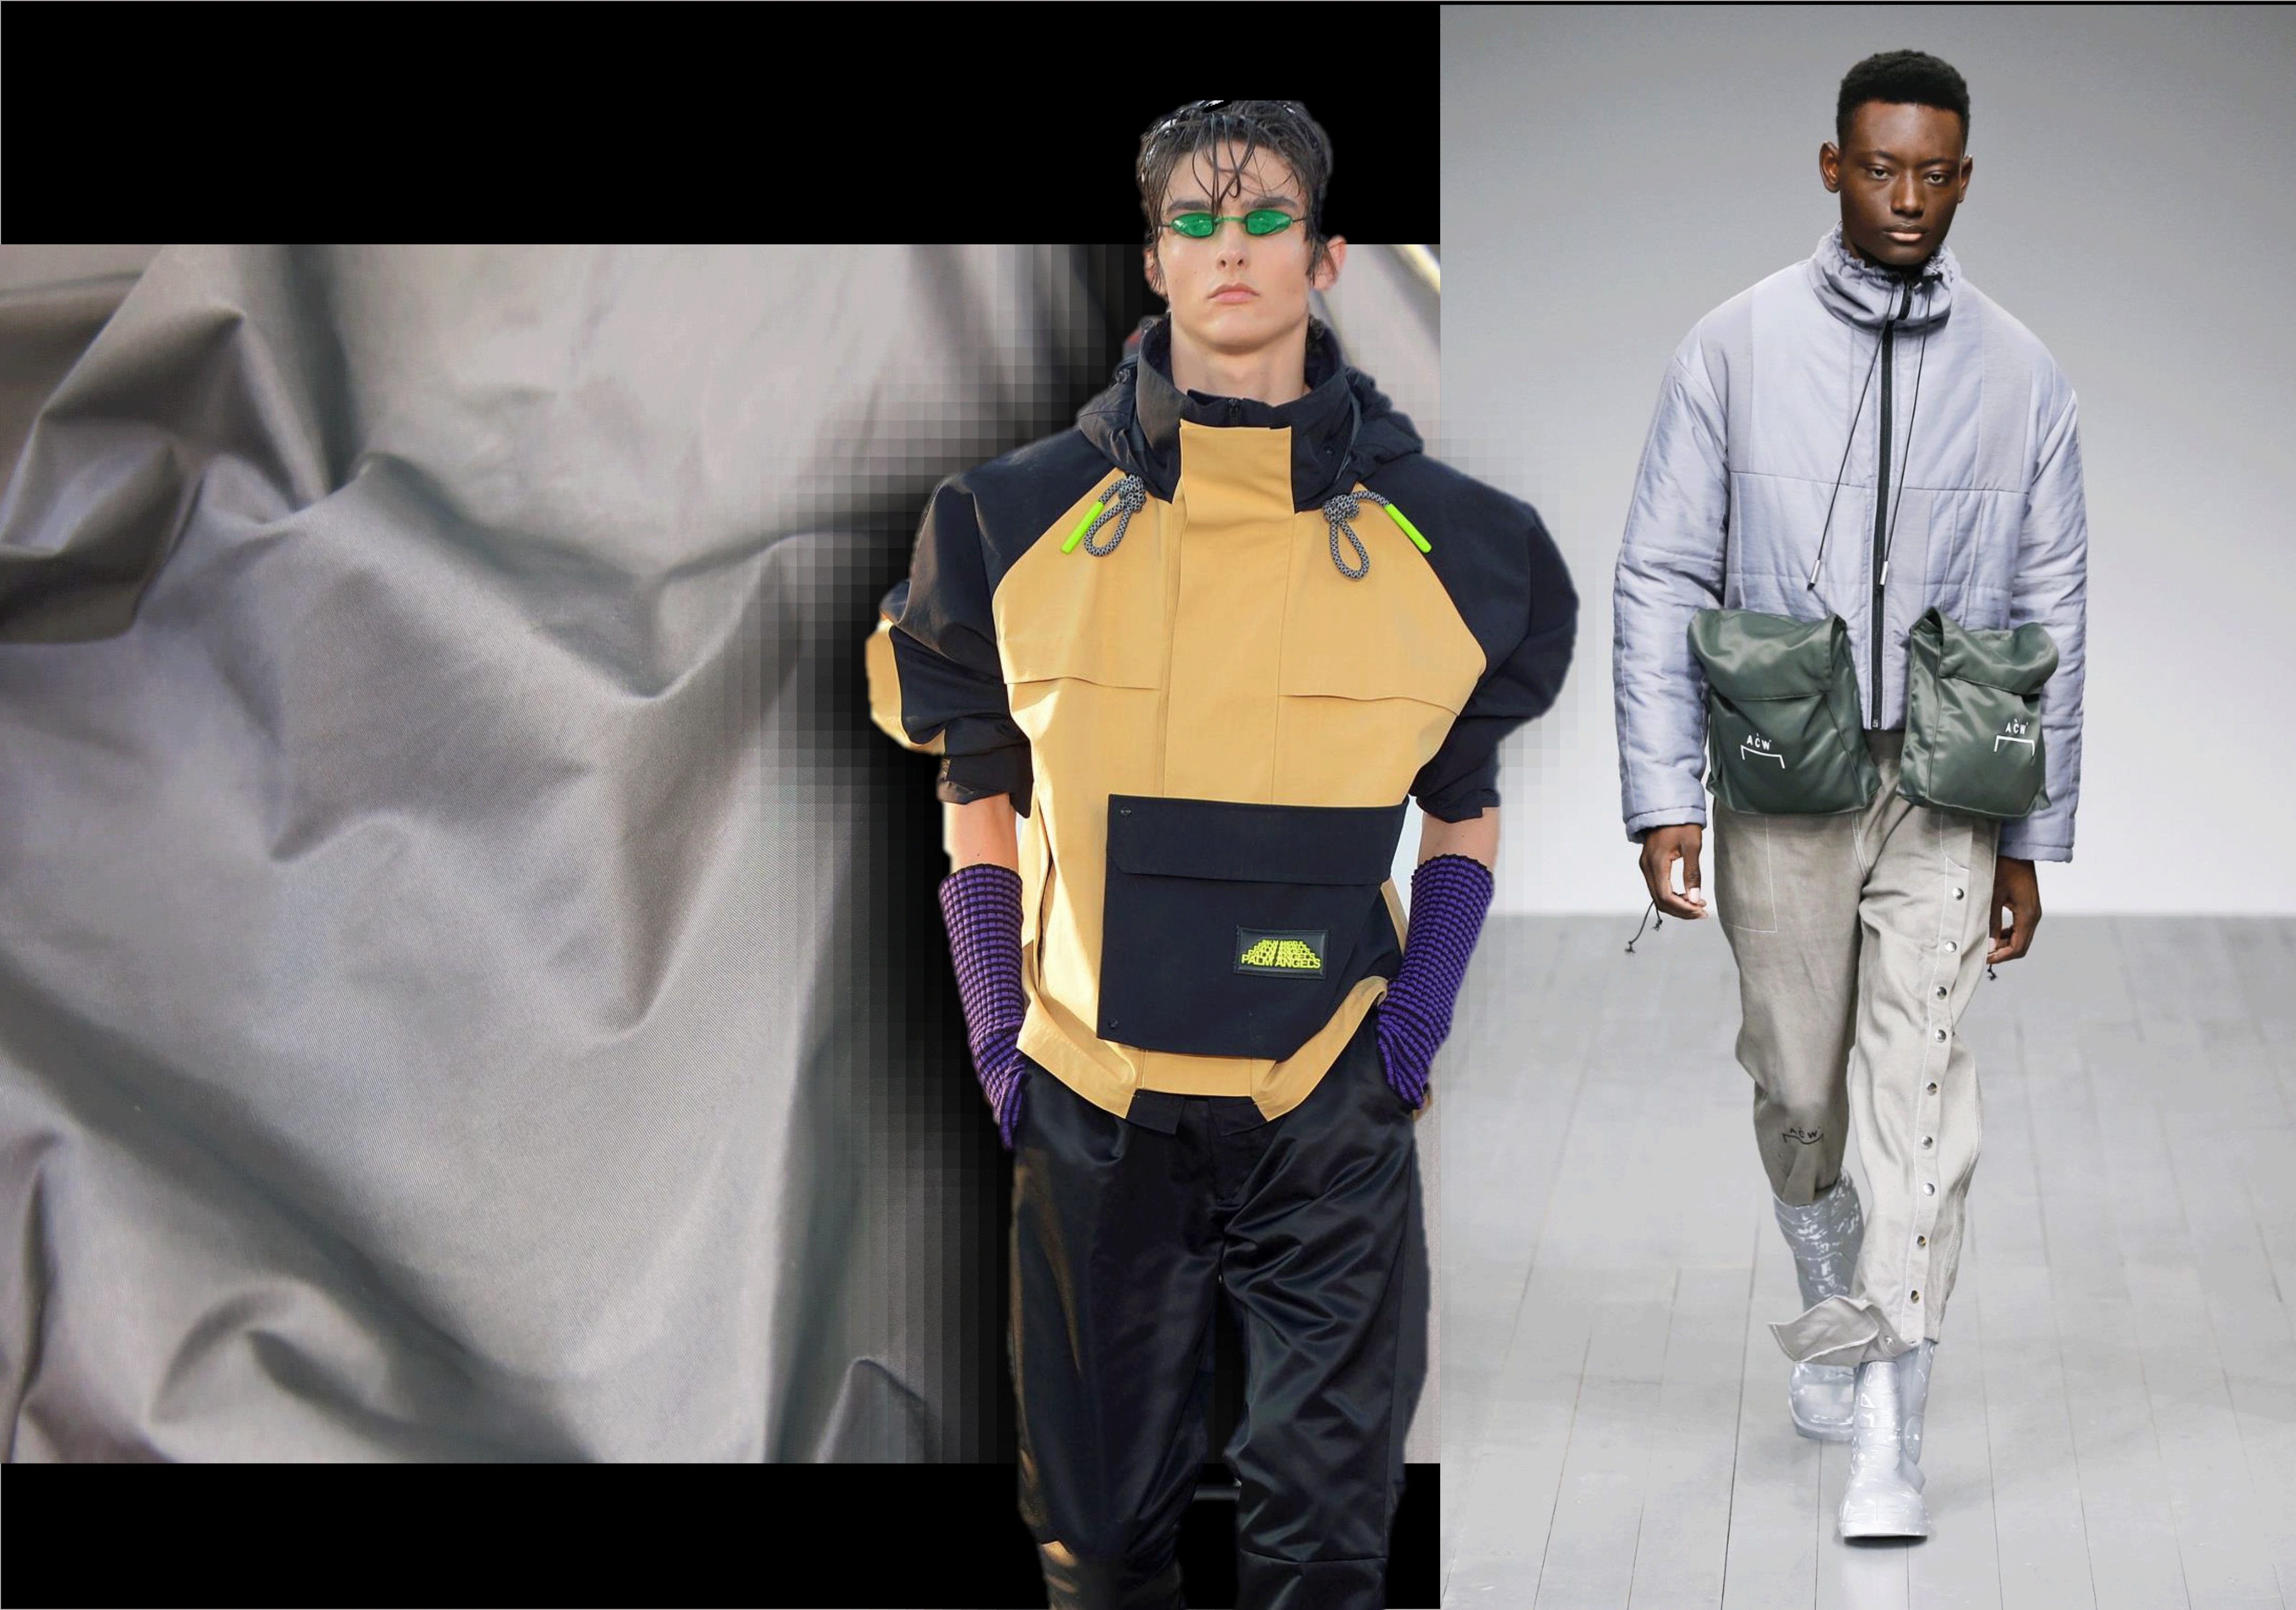 19/20 A/W Material for Men's Sportswear -- Functional Chic